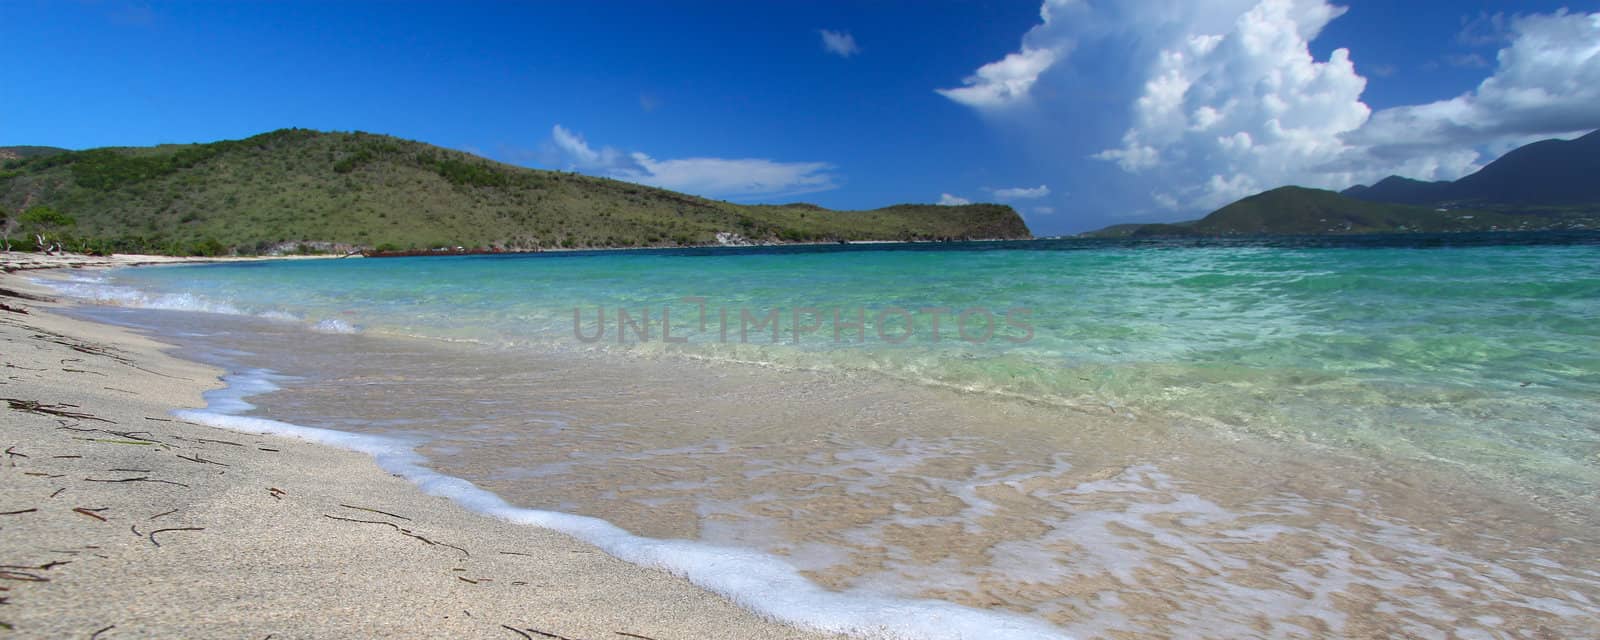 Secluded beach on Saint Kitts by Wirepec